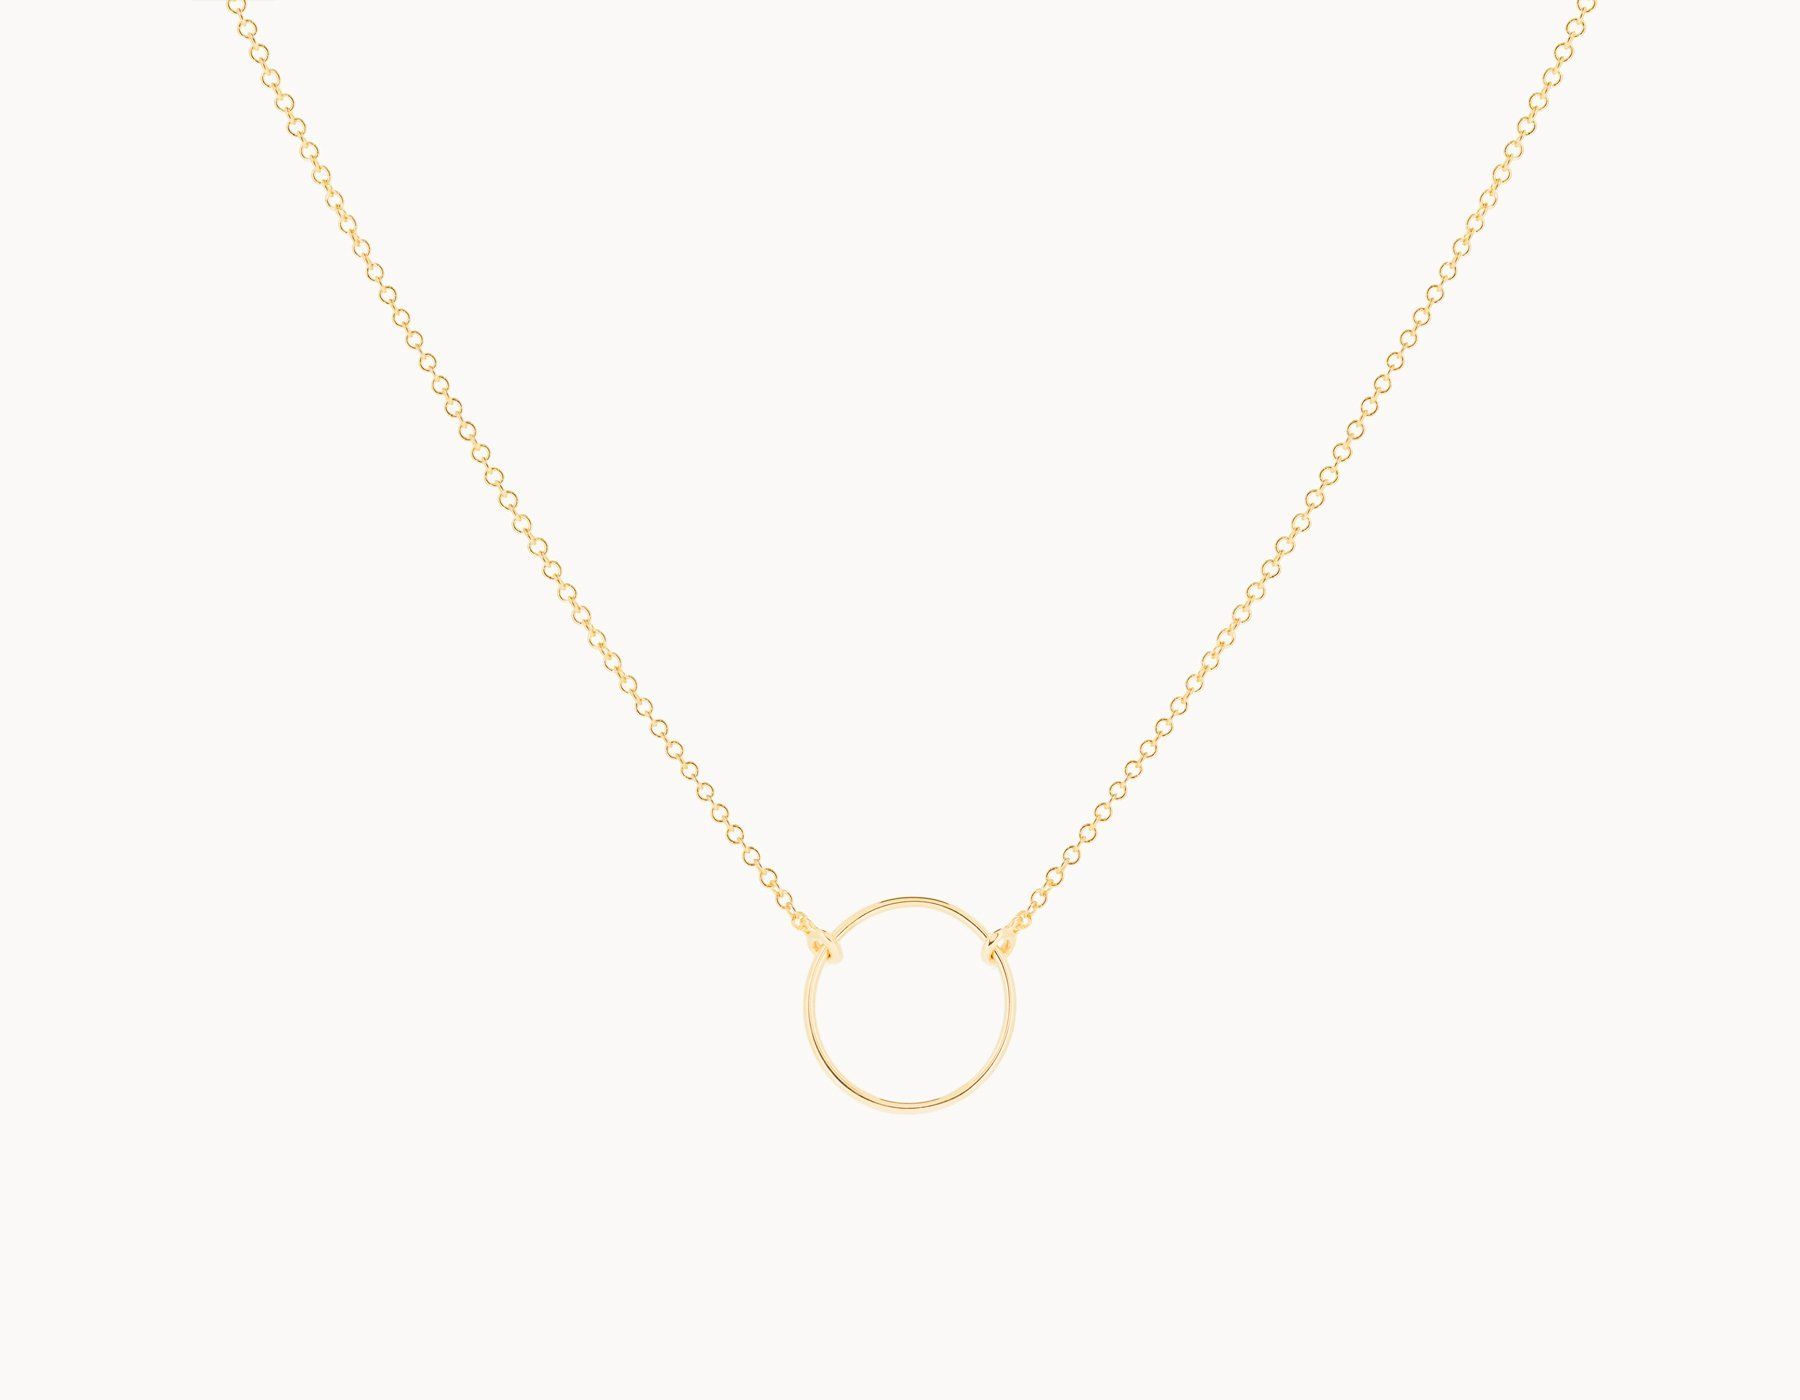 Circle Necklace | Ooh La La – My Style | Circle Necklace, Jewelry For Most Popular Circle Of Sparkle Necklaces (View 9 of 25)